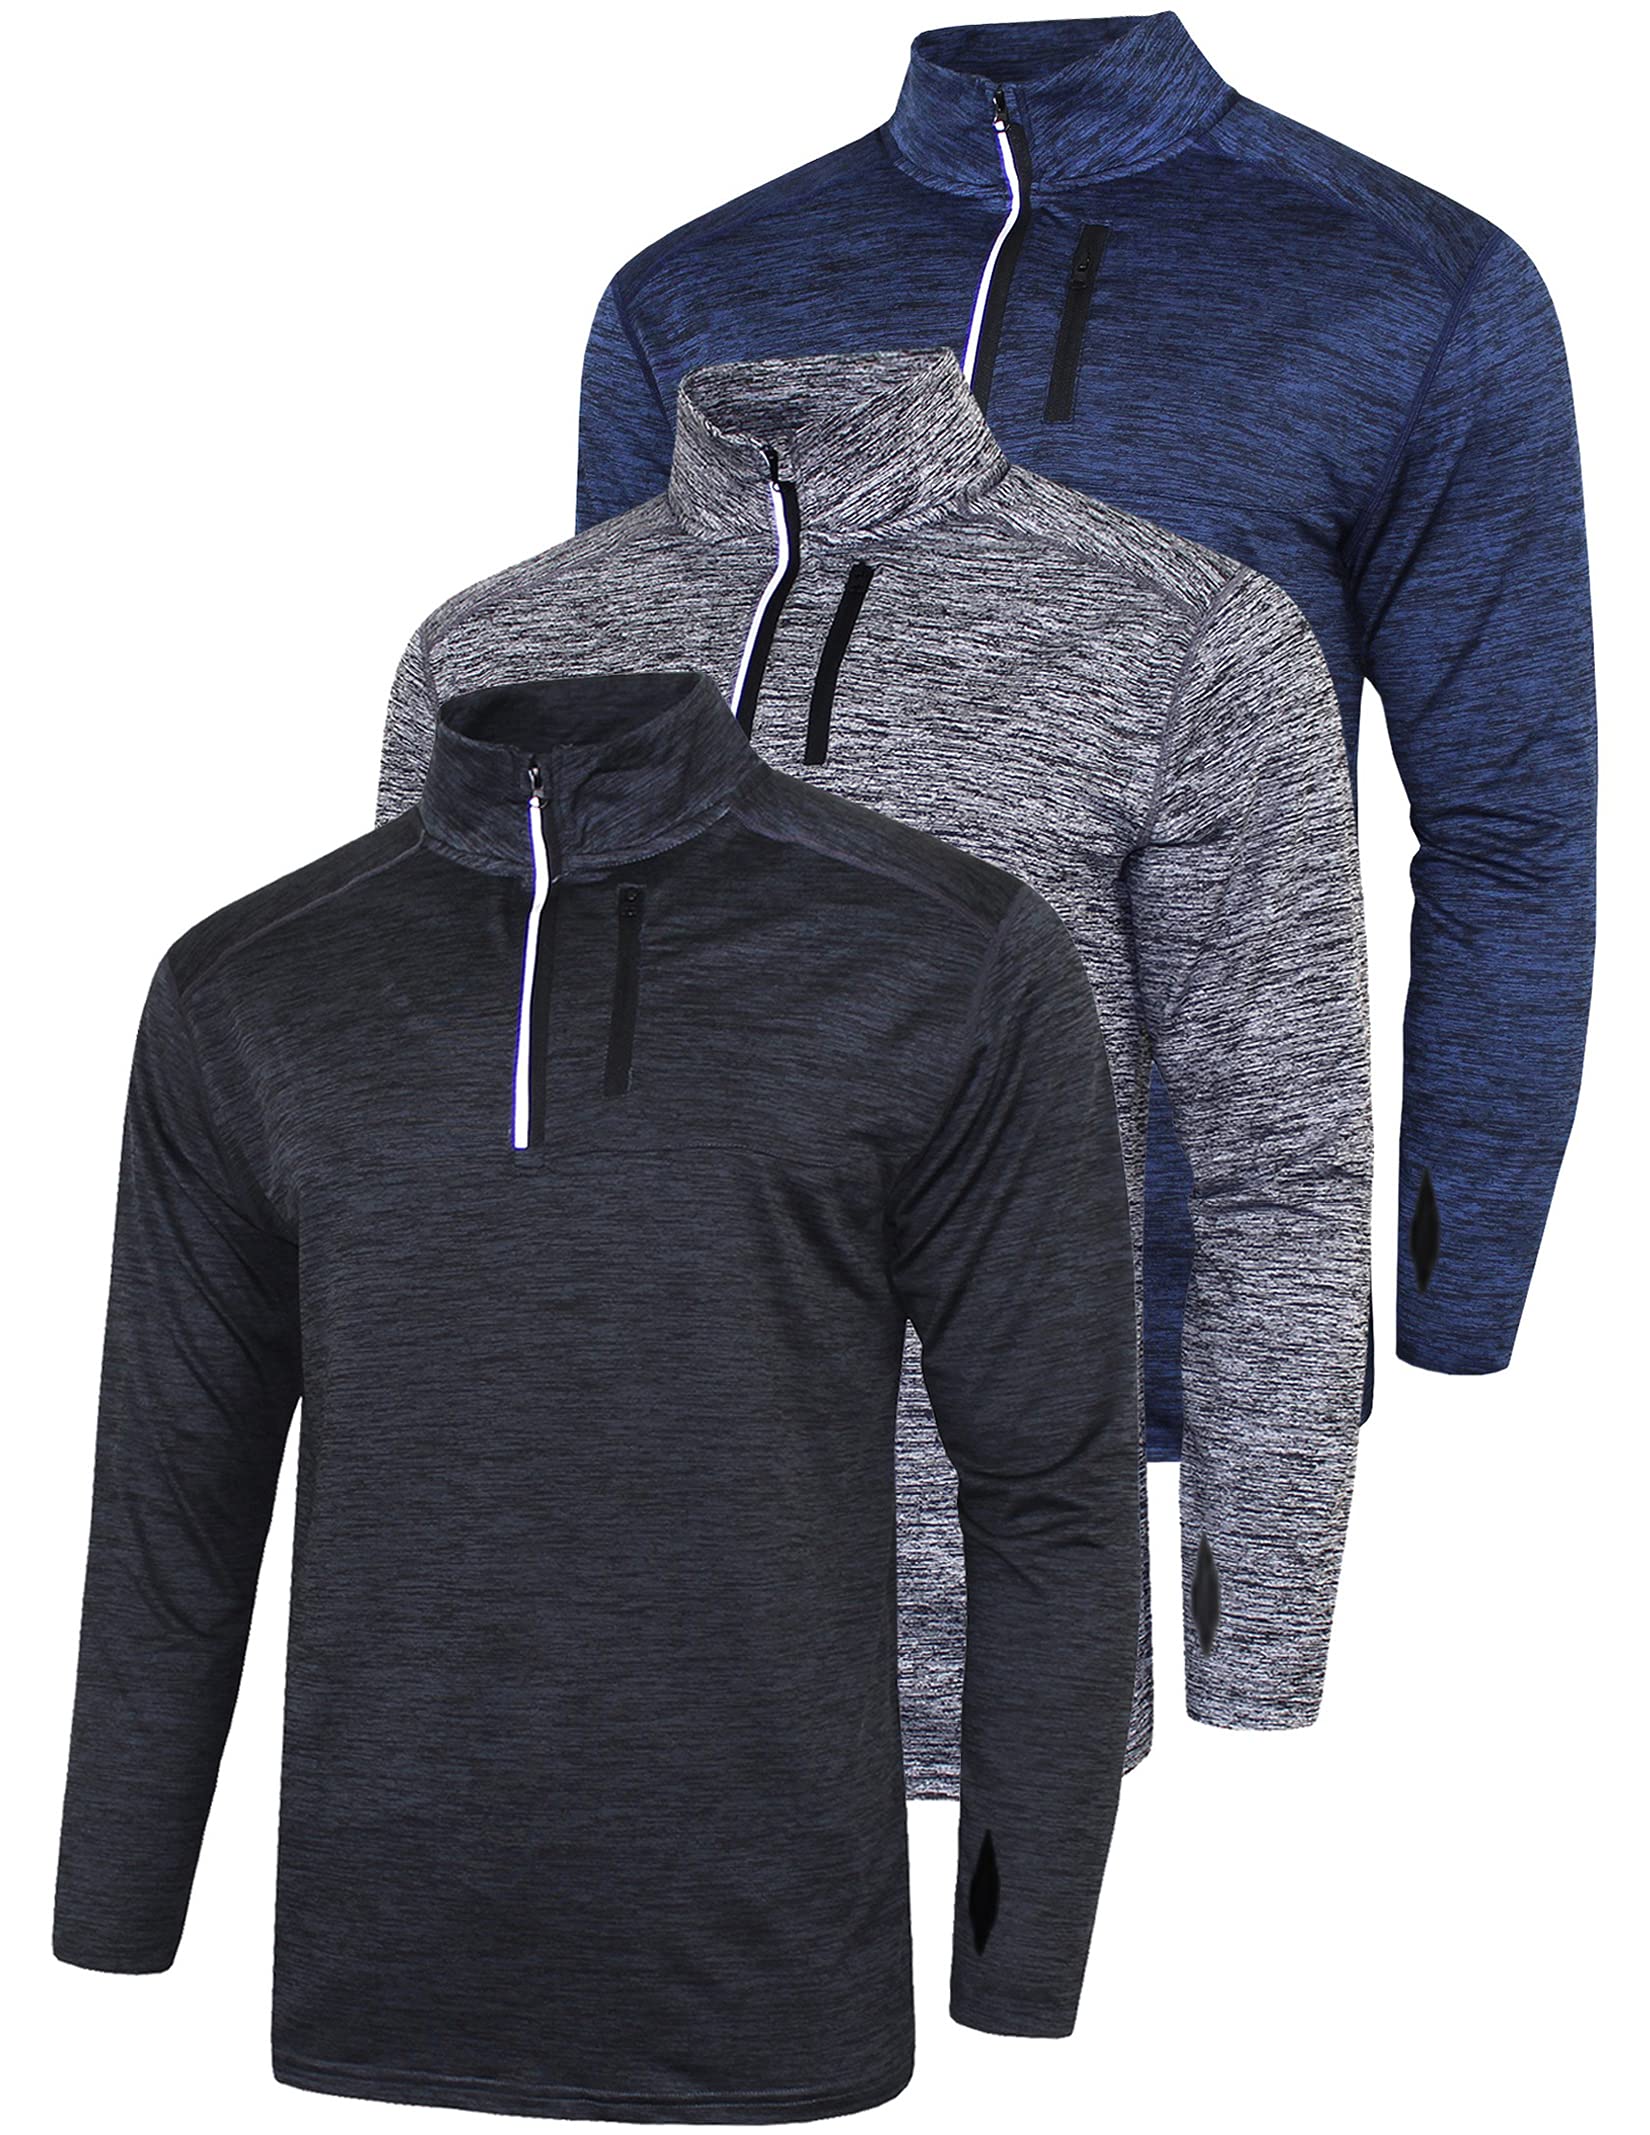 3 Pack: Men's Quarter 1/4 Zip Pullover Long Sleeve Workout Jackets, Athletic Dry Fit Running Shirts (Set 1, Small)